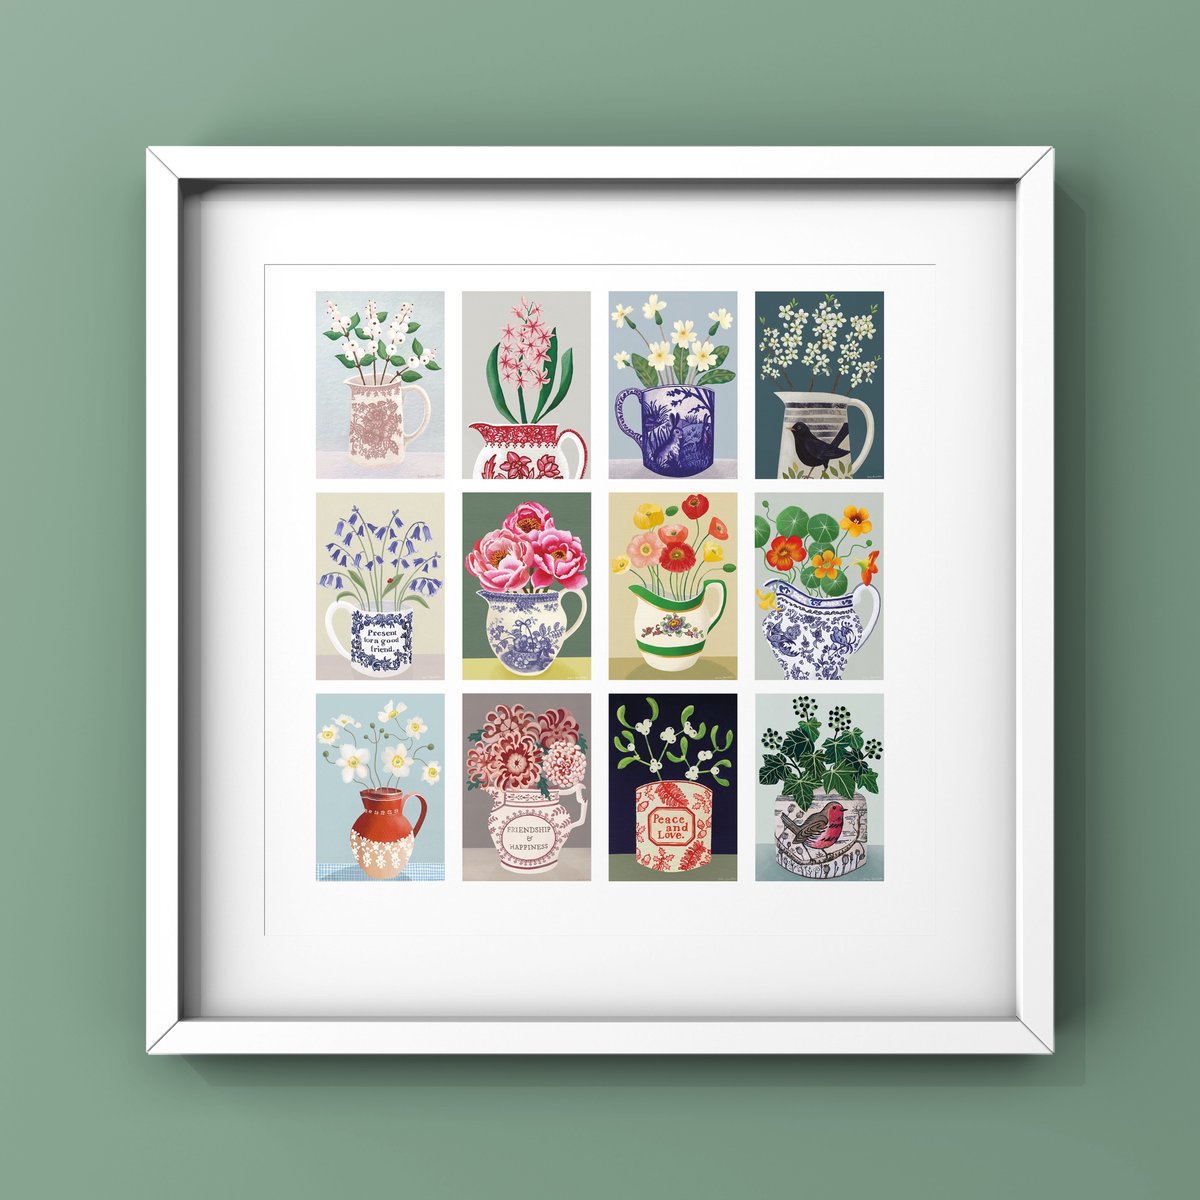 A Year in the Garden Limited Edition Print